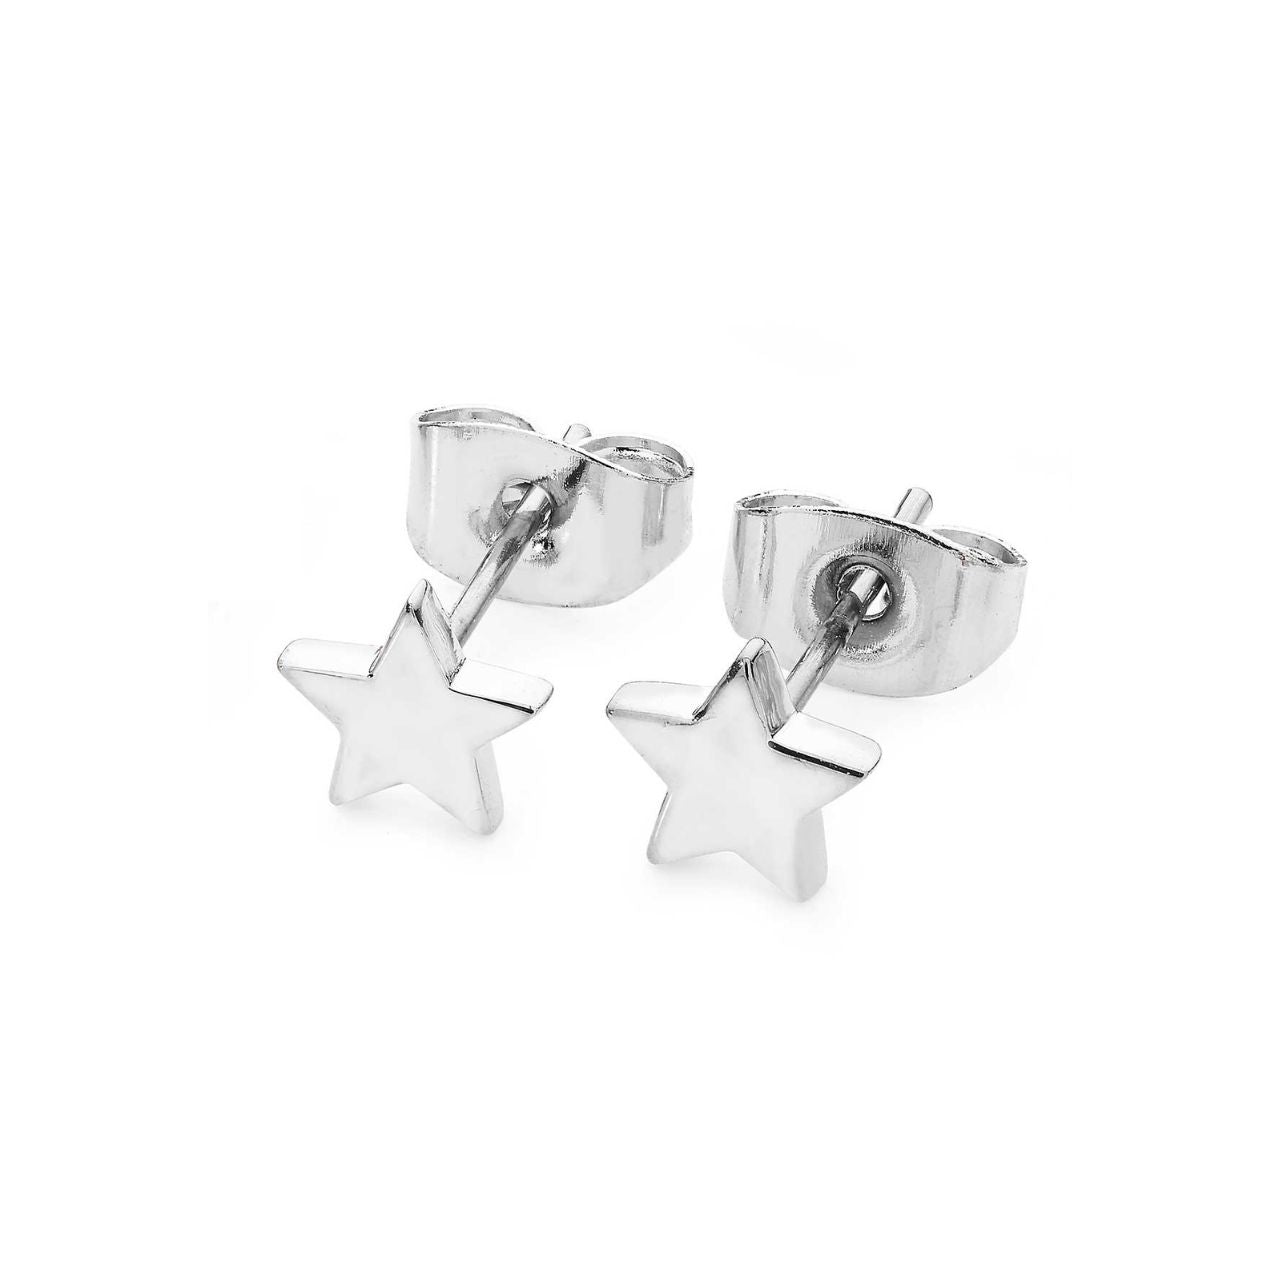 Star Mini Stud Earrings Silver by Tipperary  These dainty stud earrings are sweet and simple. Crafted in polished metal they are available in rose gold, champagne gold and silver and secure safely with pushbacks.